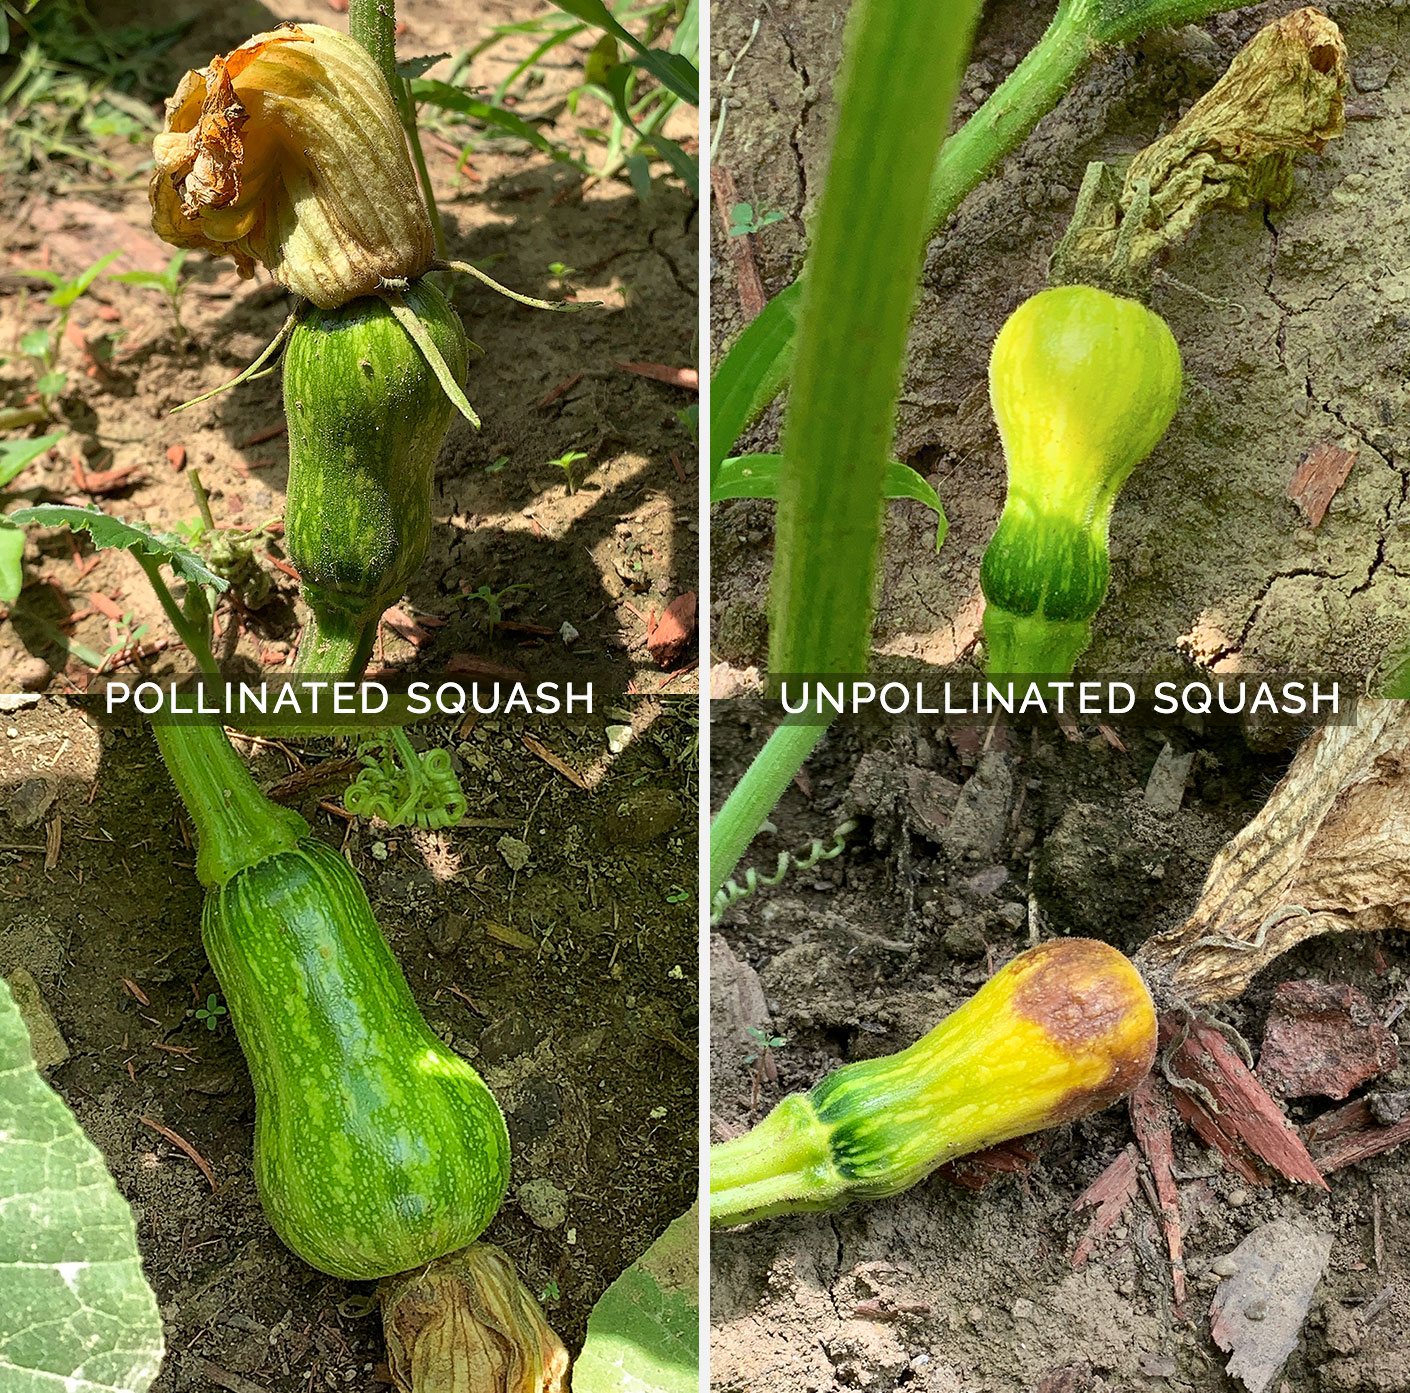 How to tell the difference between pollinated and unpollinated butternut squash